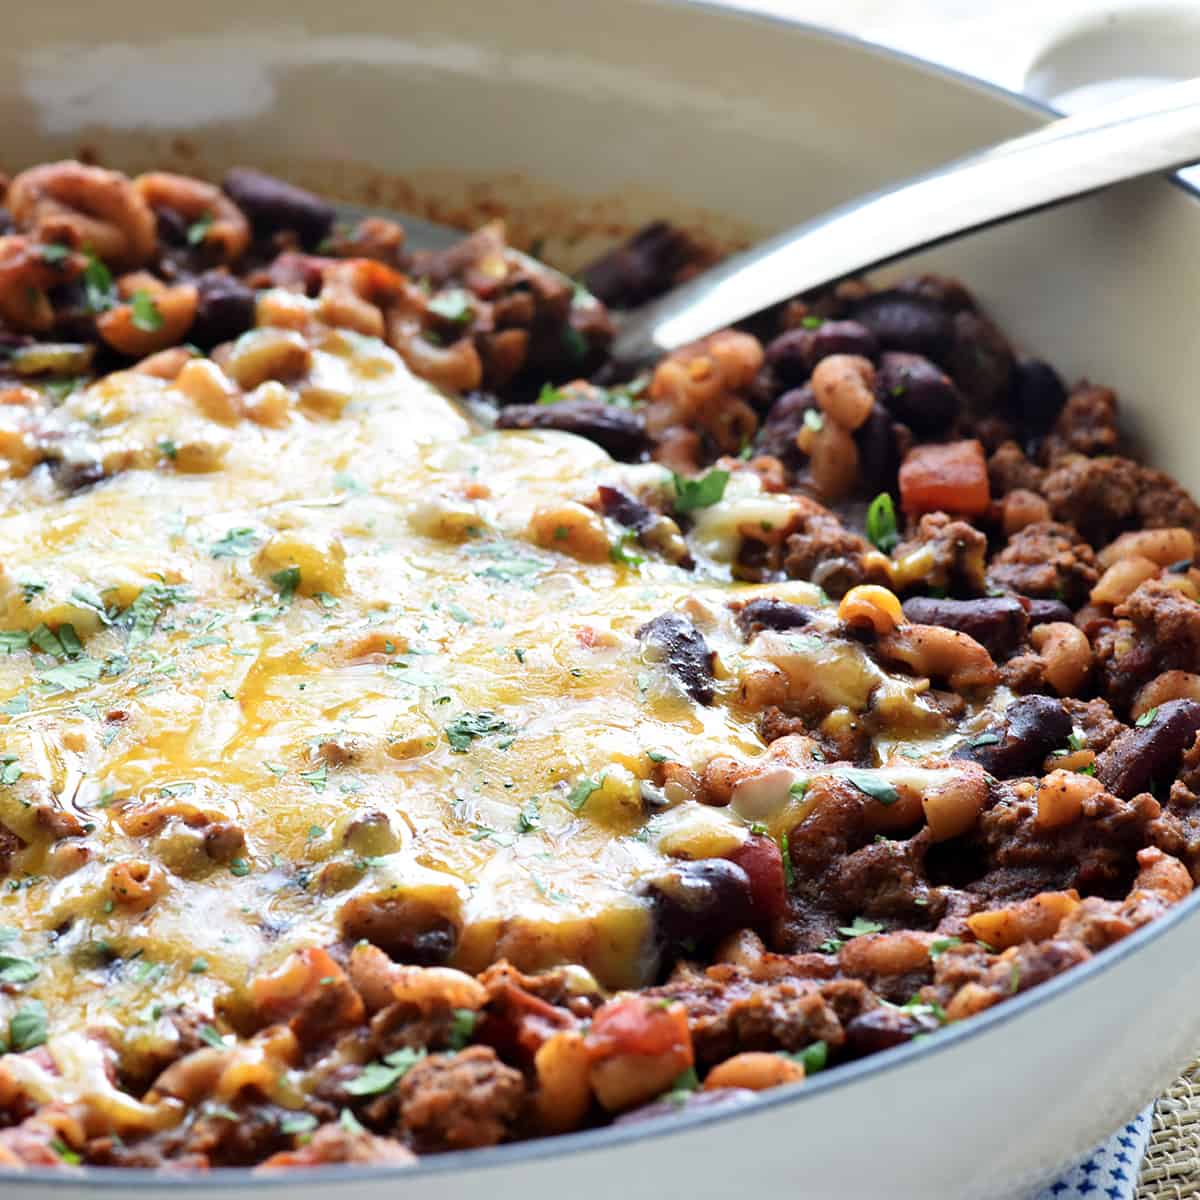 Chili Mac recipe in skillet topped with melted cheese.